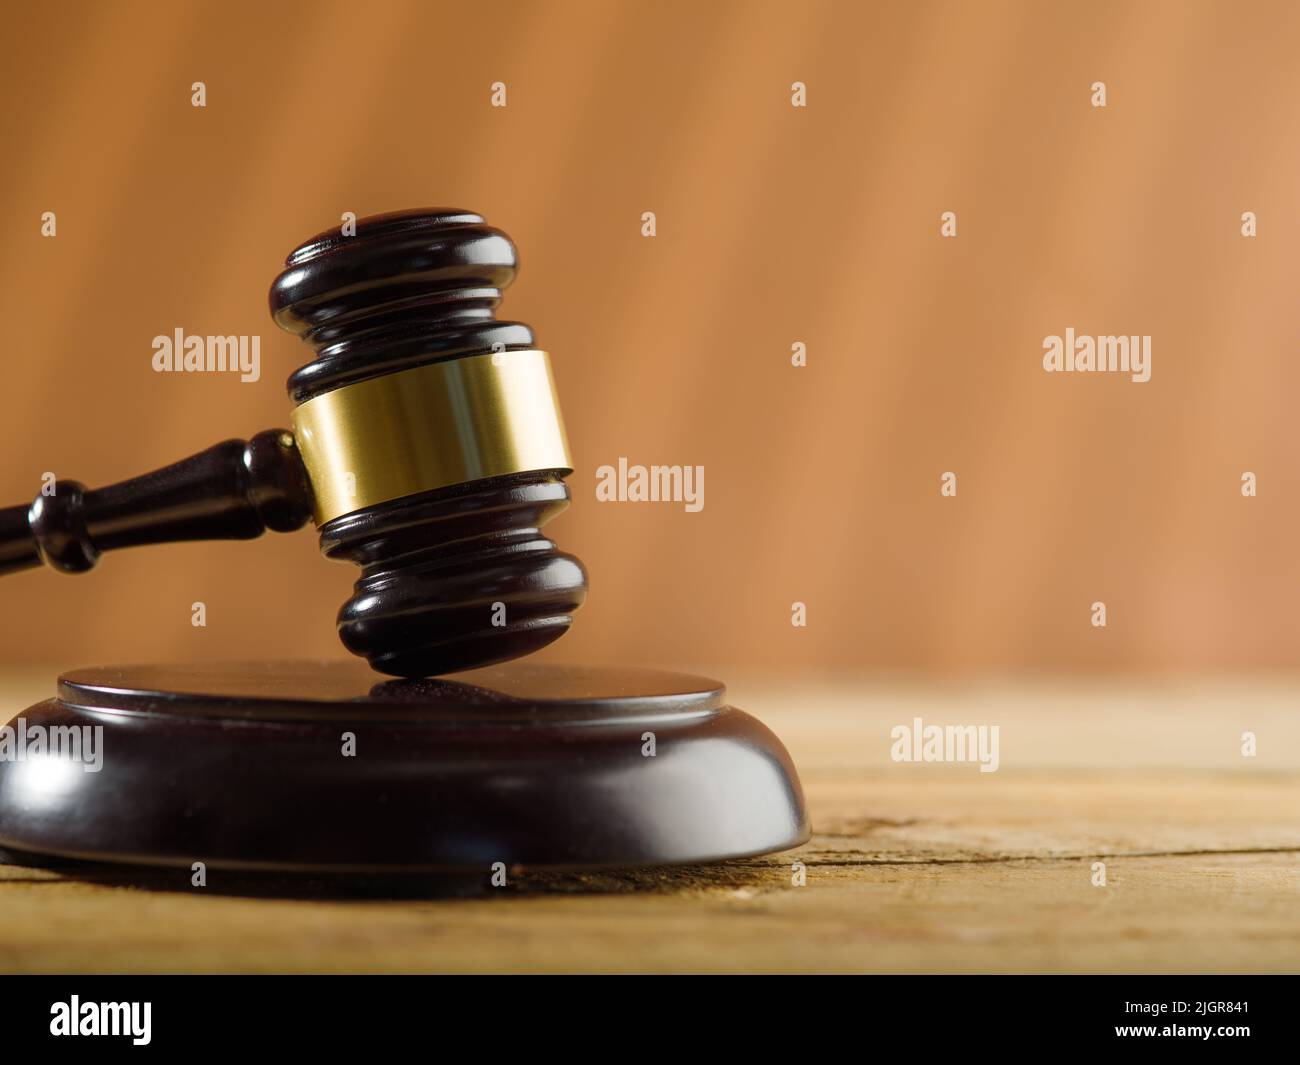 On a dark beige background, a wooden gavel of a judge. The concept is judgment and justice. Crime, punishment, rule of law, judge, lawyer. There is fr Stock Photo